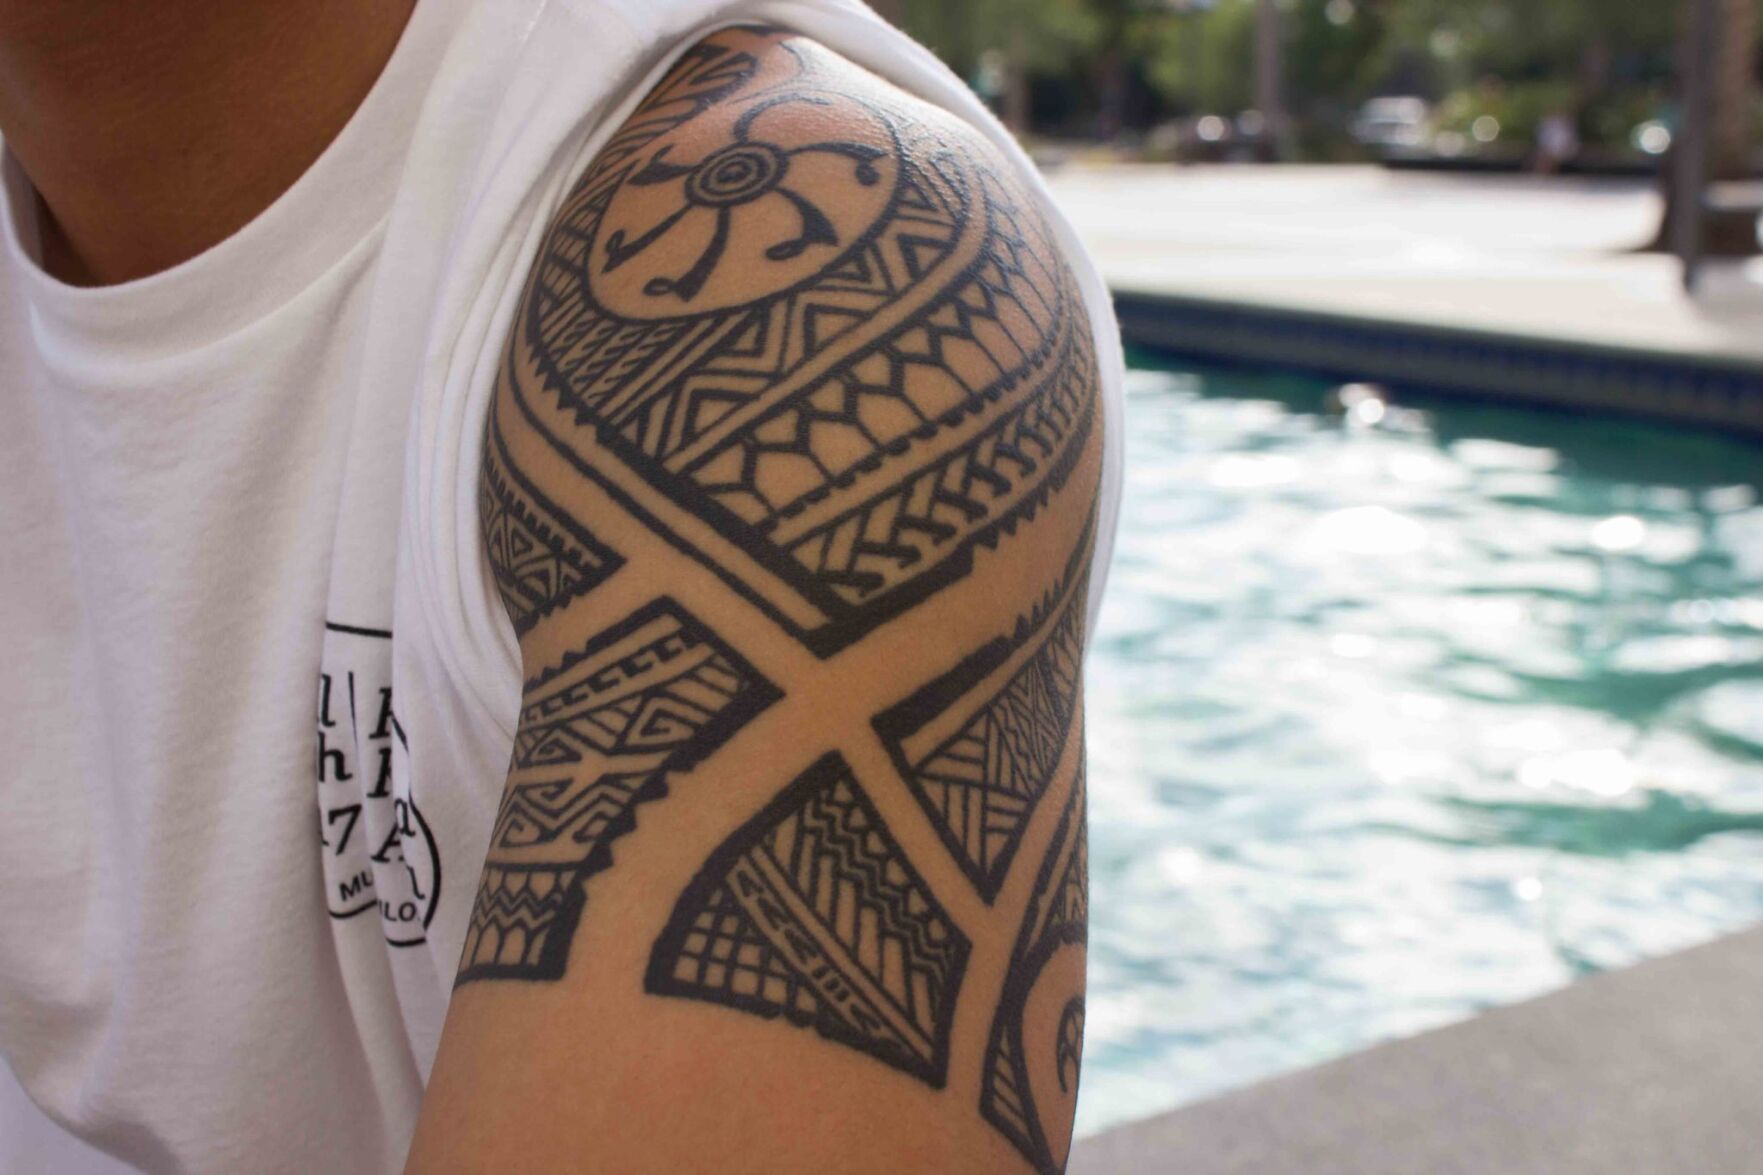 Polynesian tattoos symbolize identity and tell cultural stories